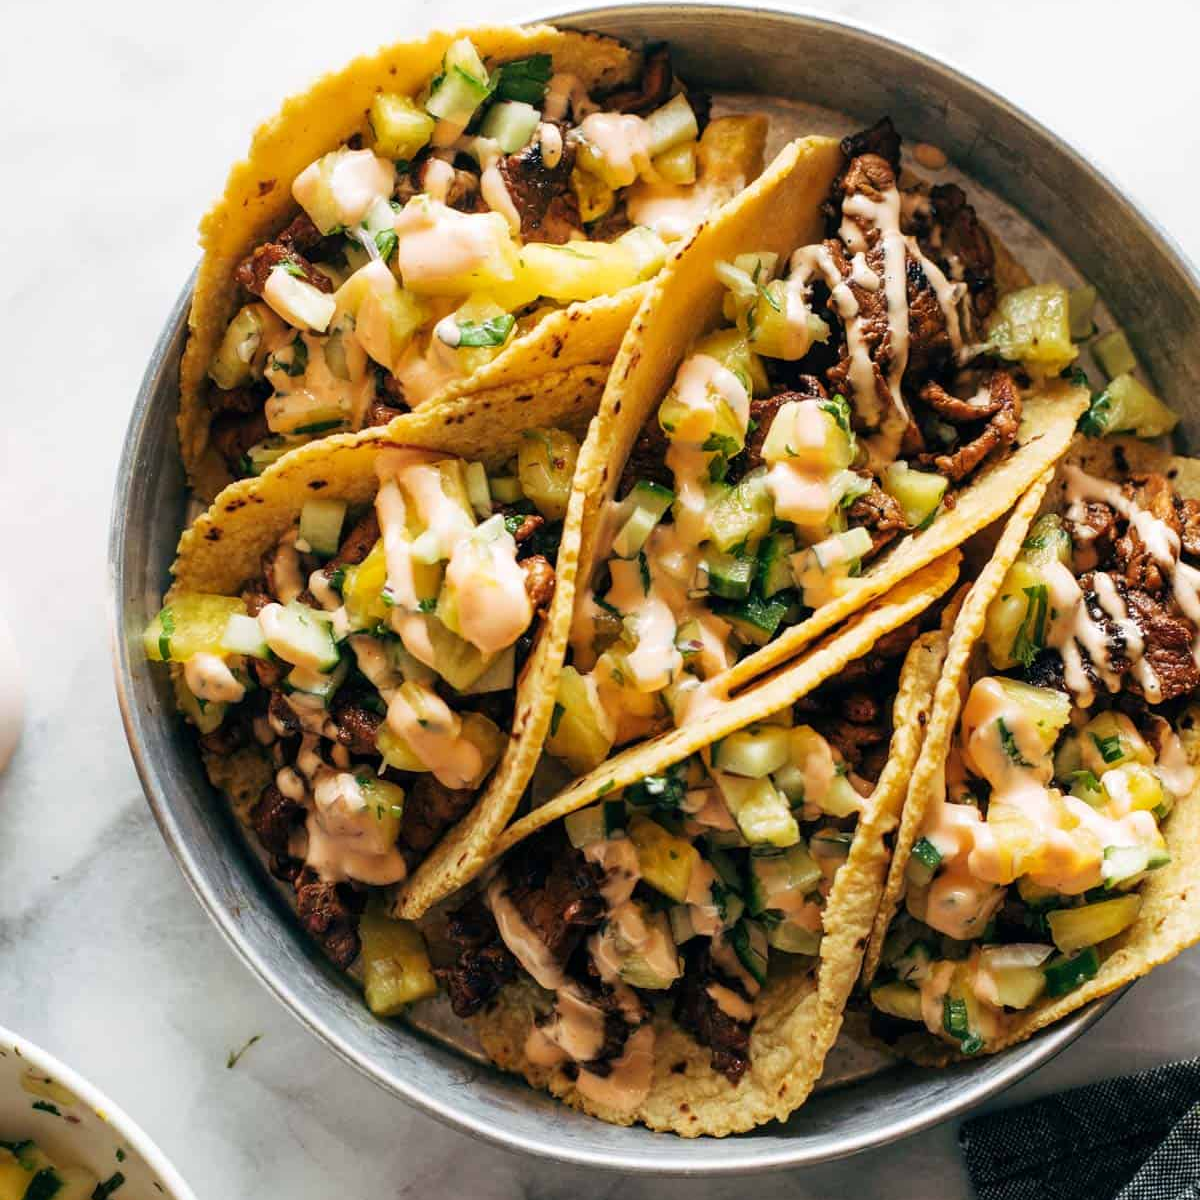 Four Caramelized Pork Tacos with Pineapple Salsa side by side in a bowl.